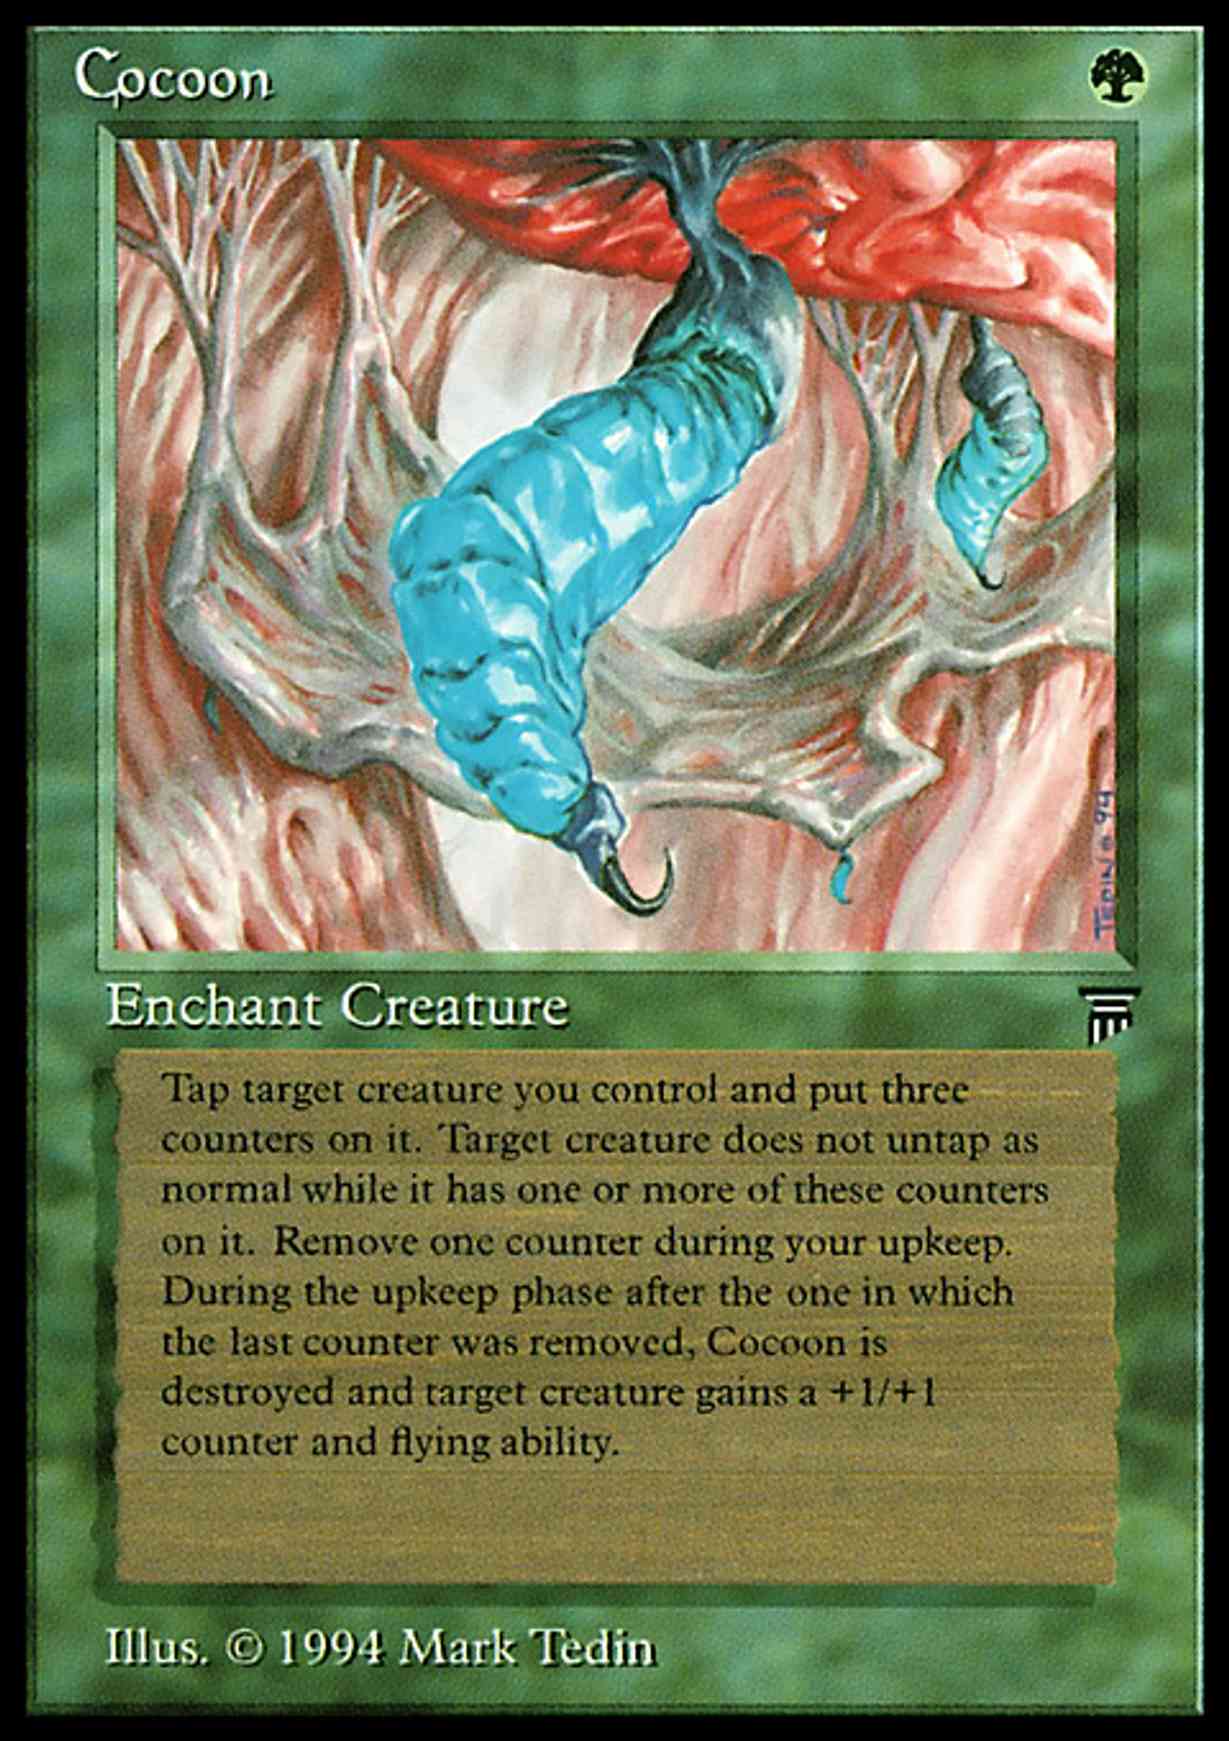 Cocoon magic card front